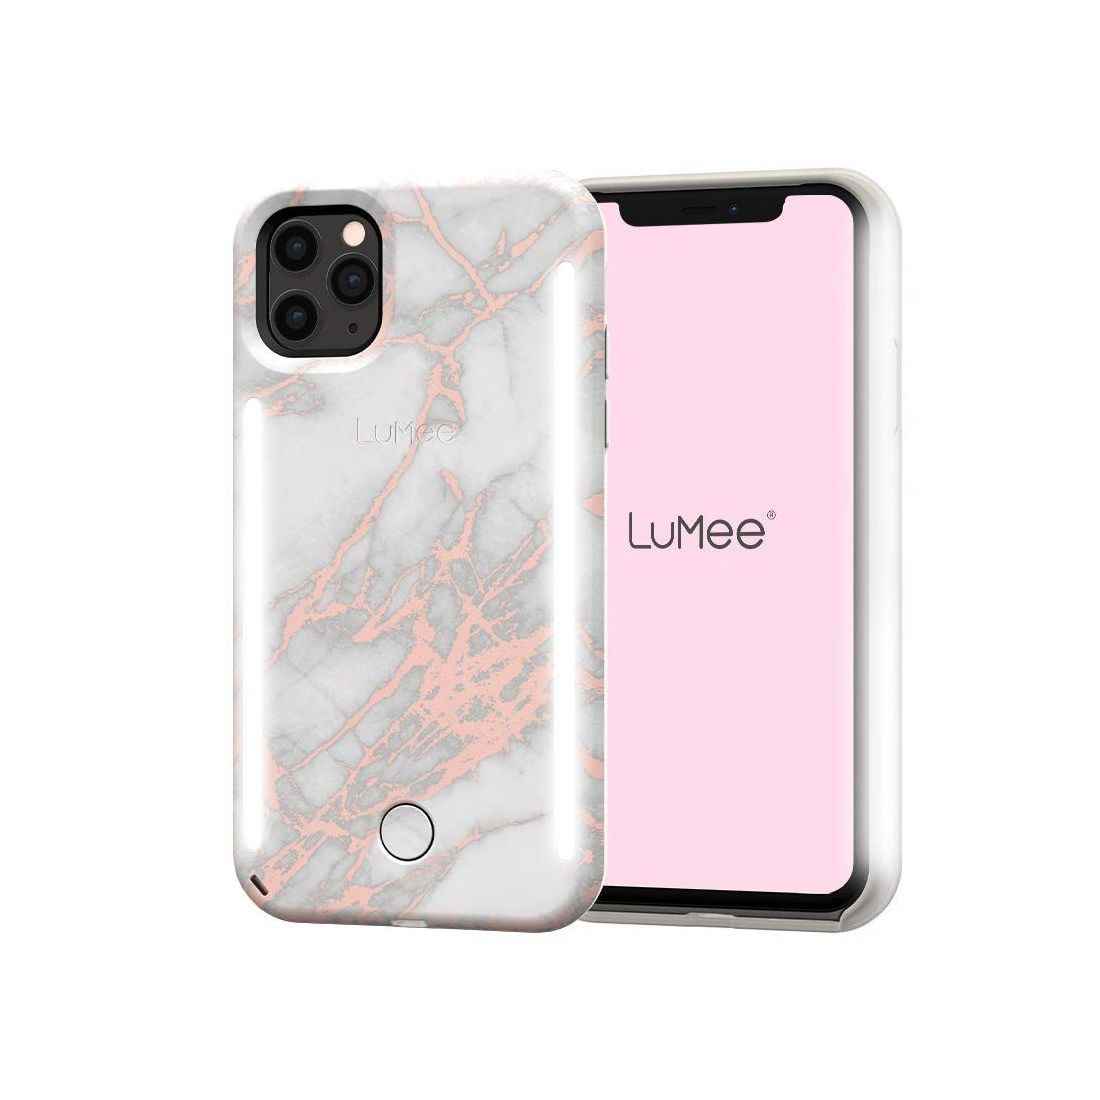 Lumee Duo Case Metallic Marble White/Rose Gold for iPhone 11 Pro Max